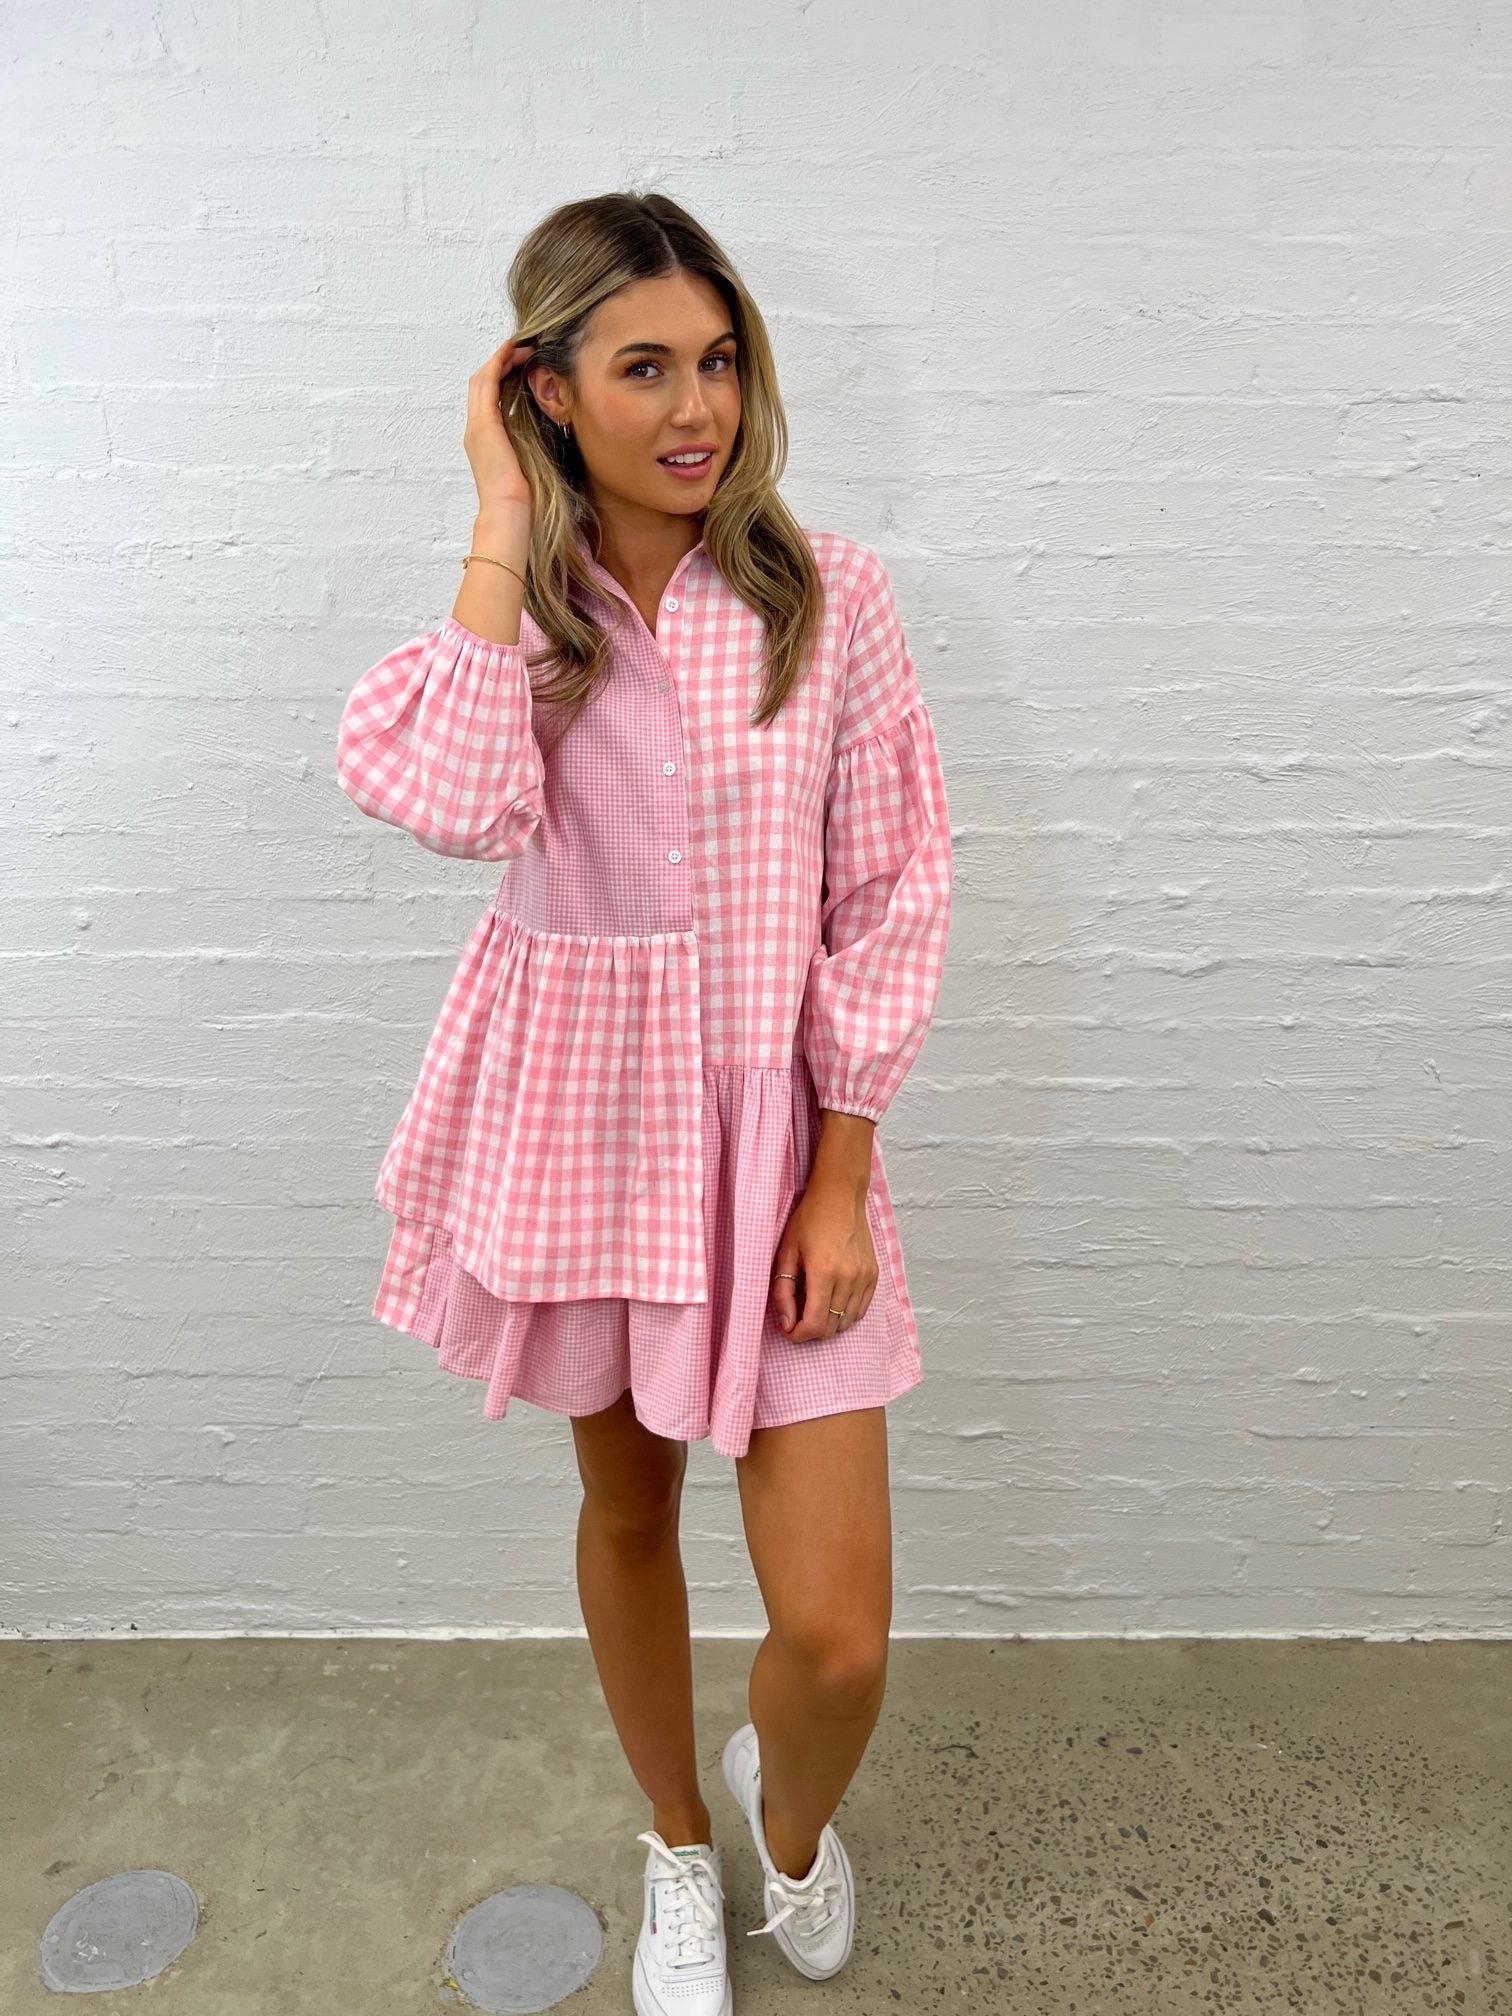 Turn heads in pink: Gingham shirt dress. Effortless, chic, and irresistibly stylish. Shop the look today!